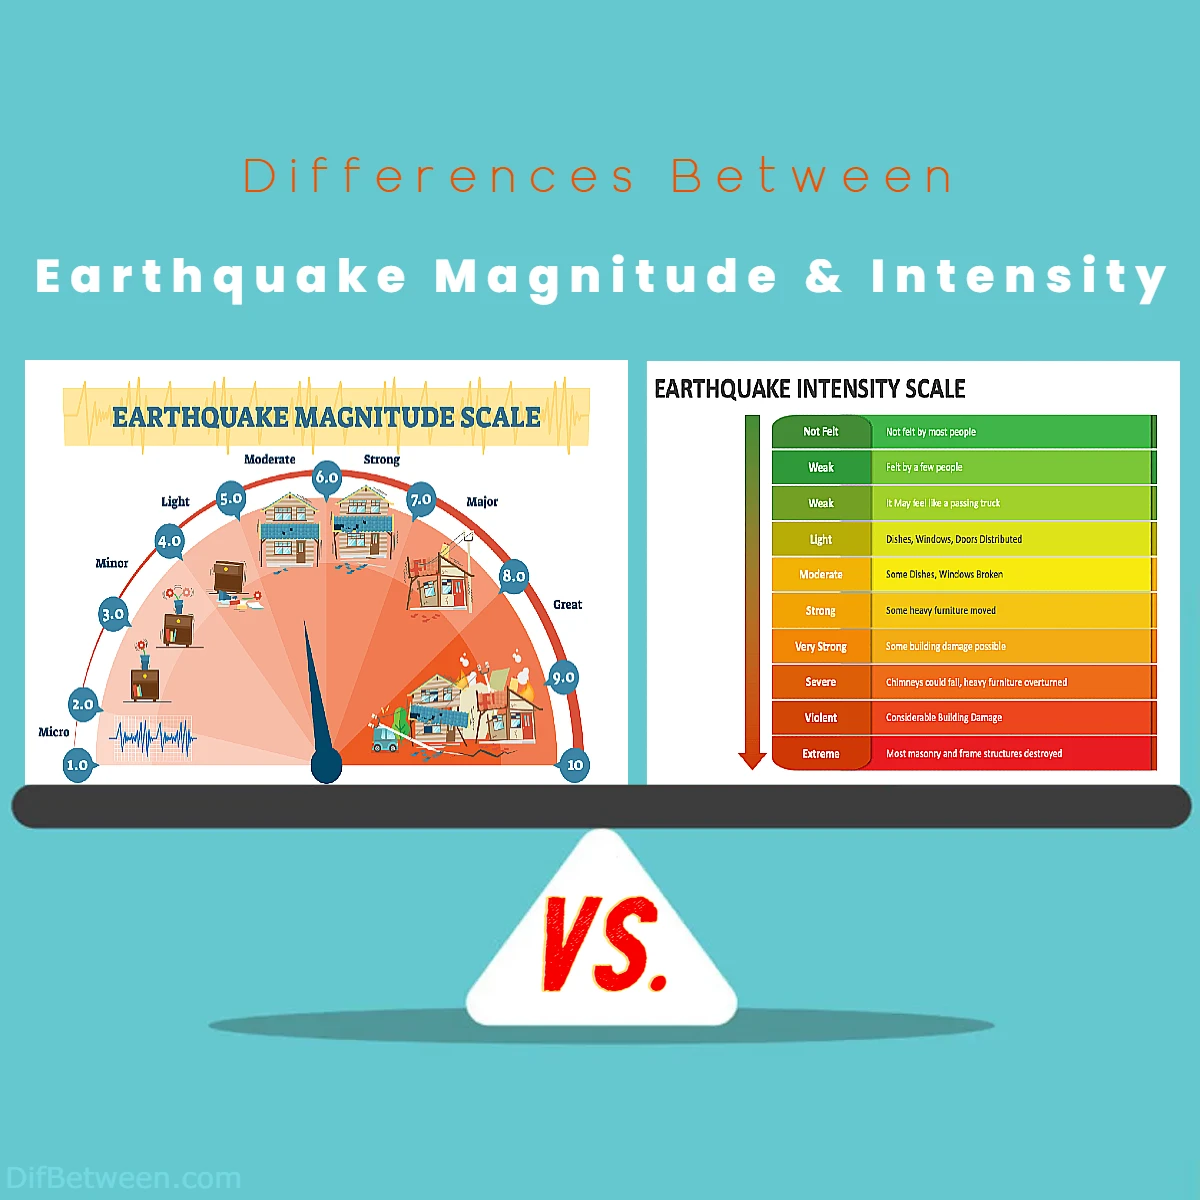 Differences Between Earthquake Magnitude vs Intensity